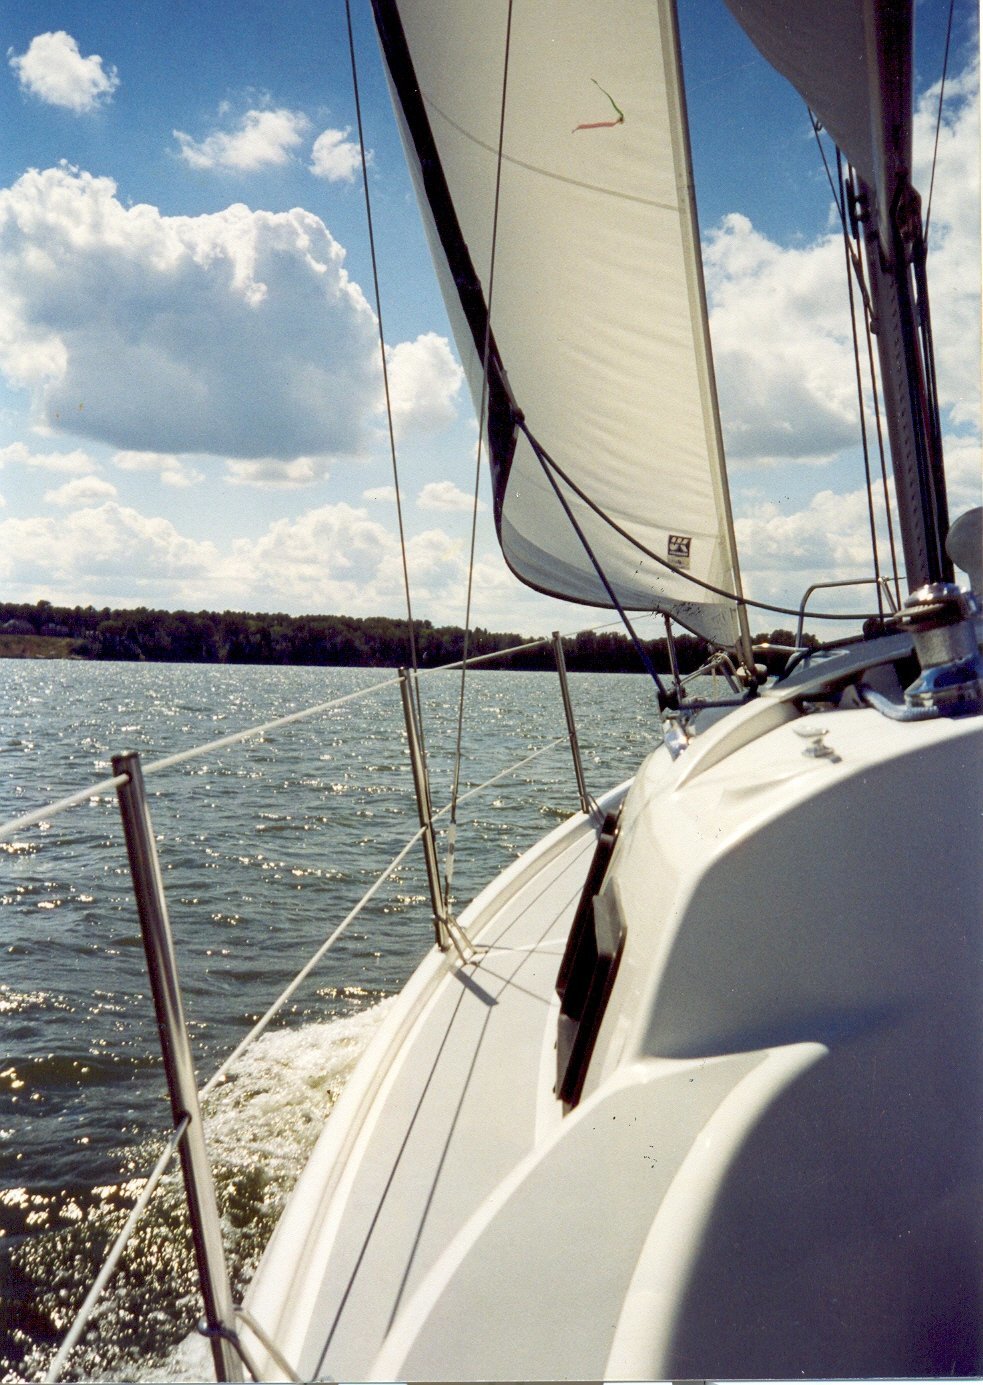 The view from the side of the sailboat with the water and shore out ahead